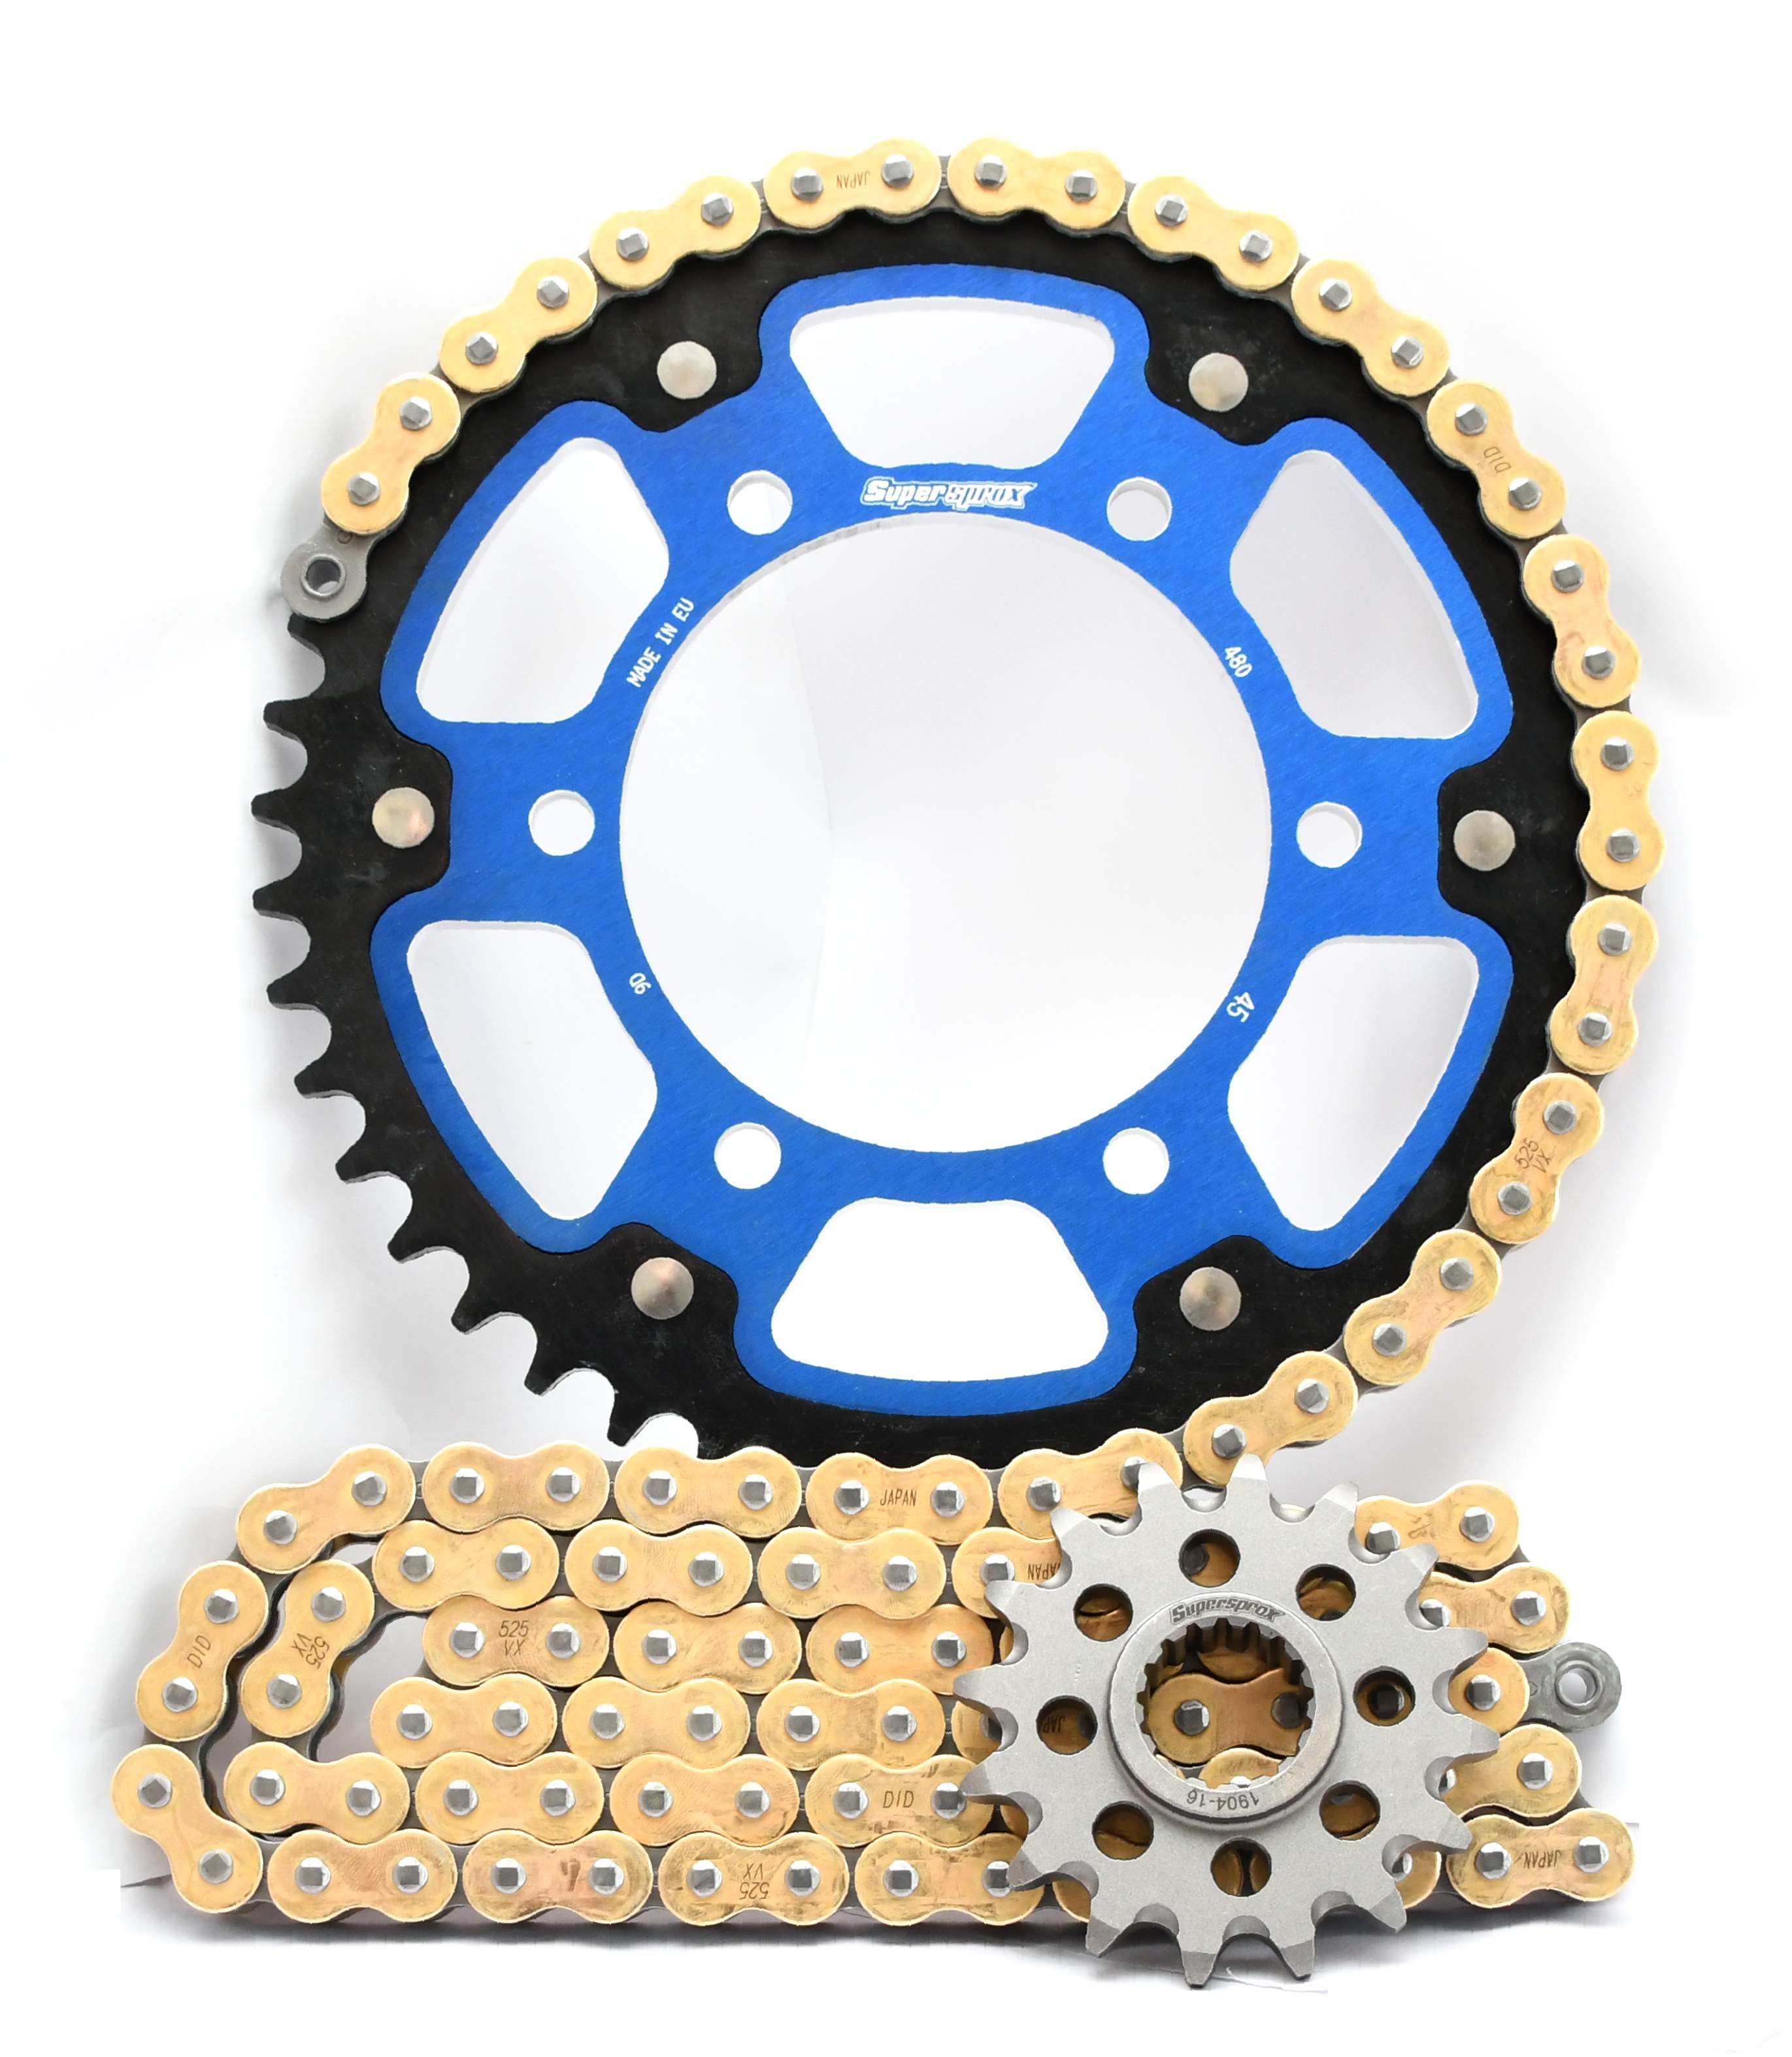 Supersprox Chain & Sprocket Kit for Yamaha YZF R6 2003-2005 - Standard Gearing - 530 Conversion